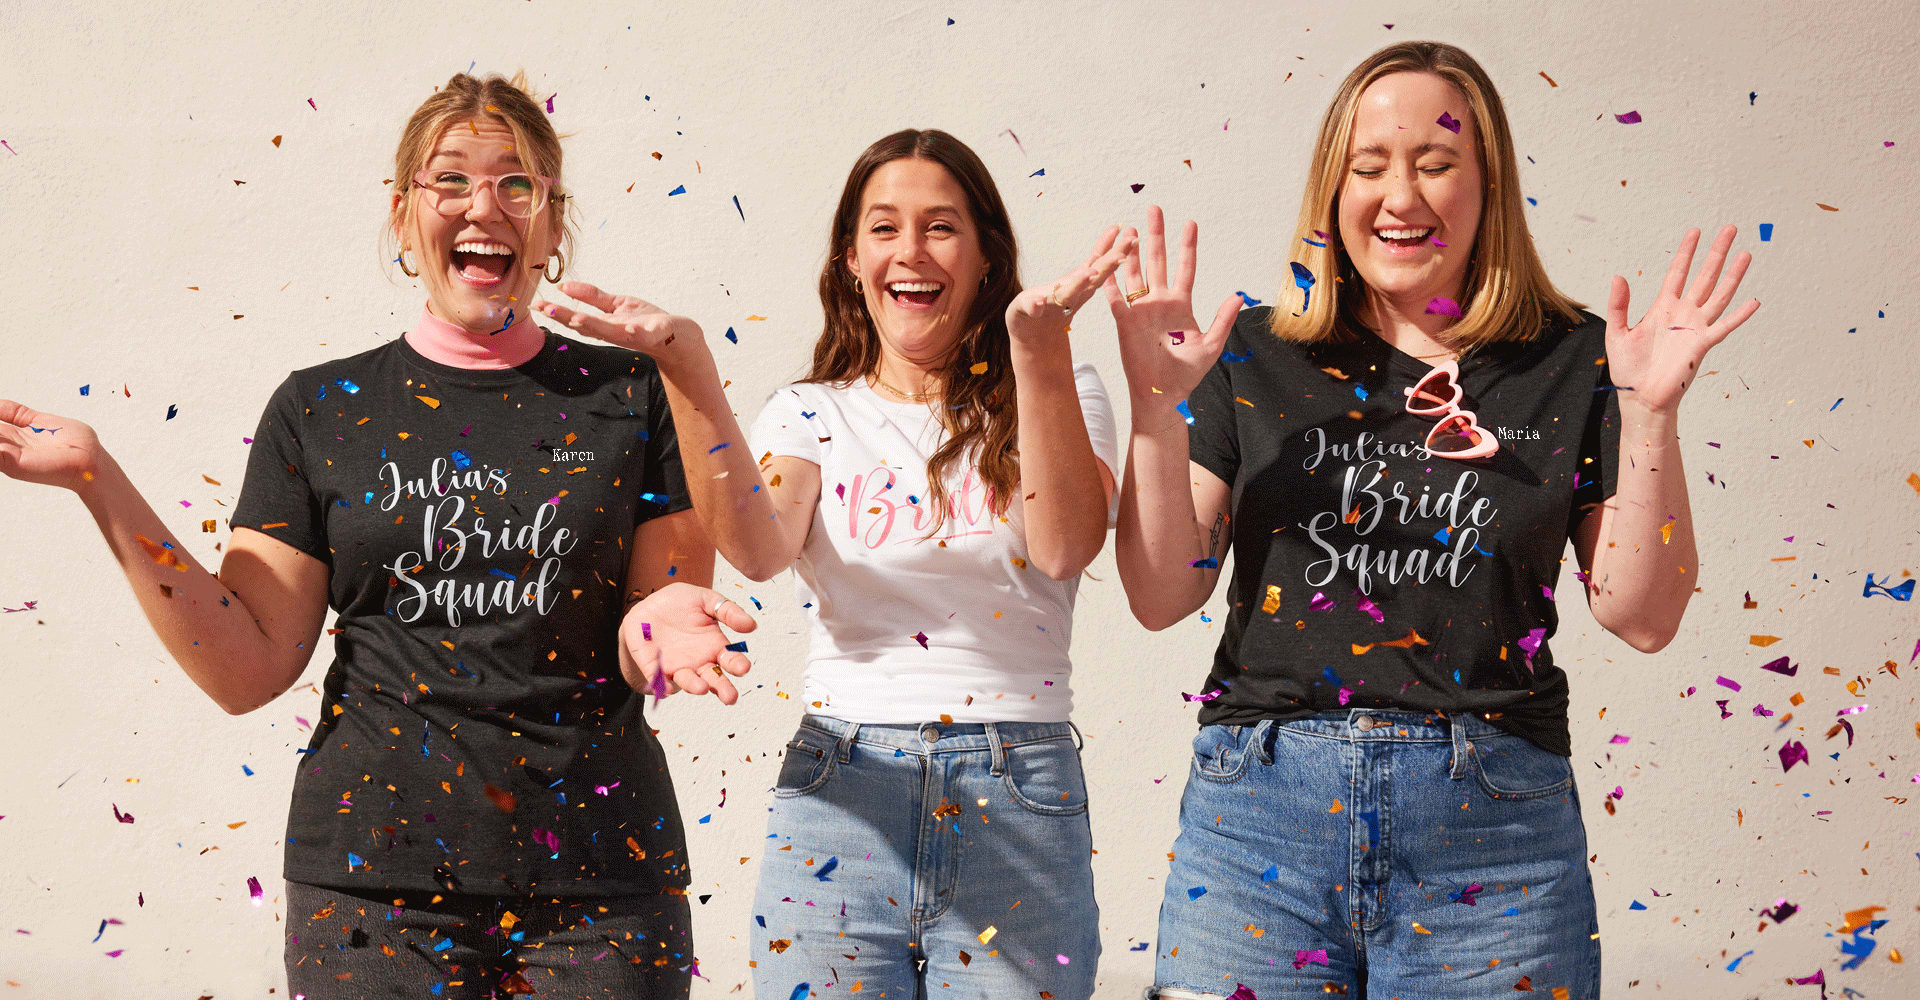 Overjoyed young girls wearing matching fruit of the loom® slim fit women's t-shirt and having fun with colorful confetti, celebrating at a wedding party.